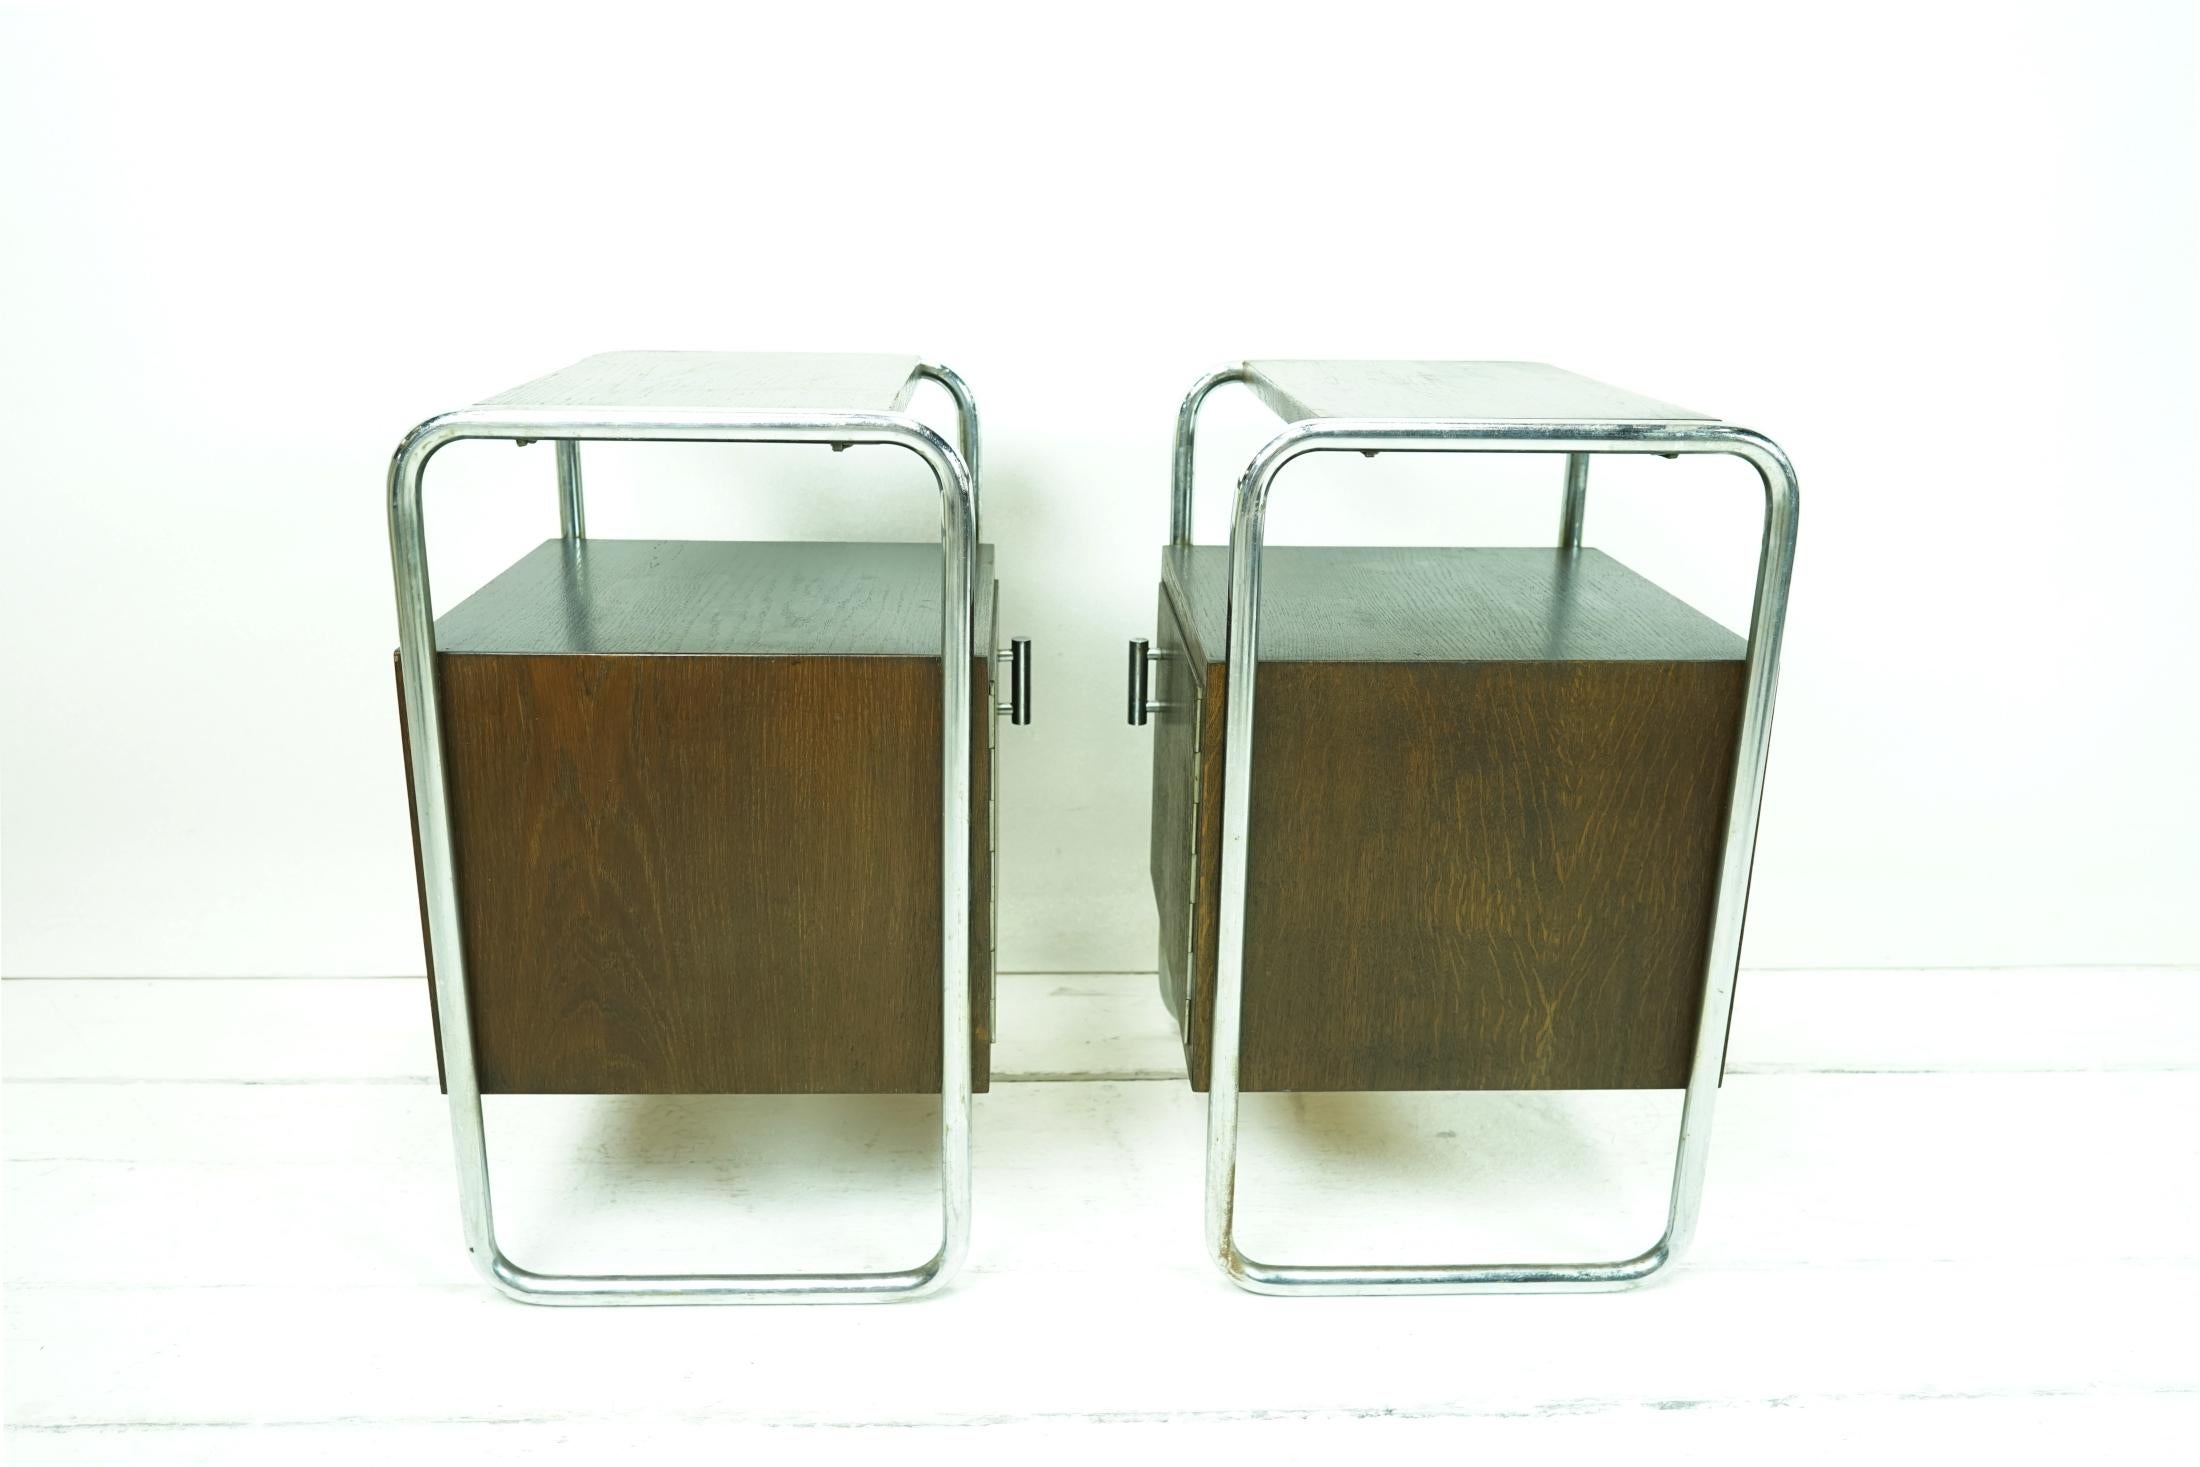 Object: side table - wood/chrome (set 2 pieces)

Time: Original around 1935

Style: Bauhaus

Manufacturer/Designer: Slezak/Thonet

Dimensions: W 40 H 60 D 37 +knob

Bauhaus nightstands from the 30s.
The steel tube has been polished and